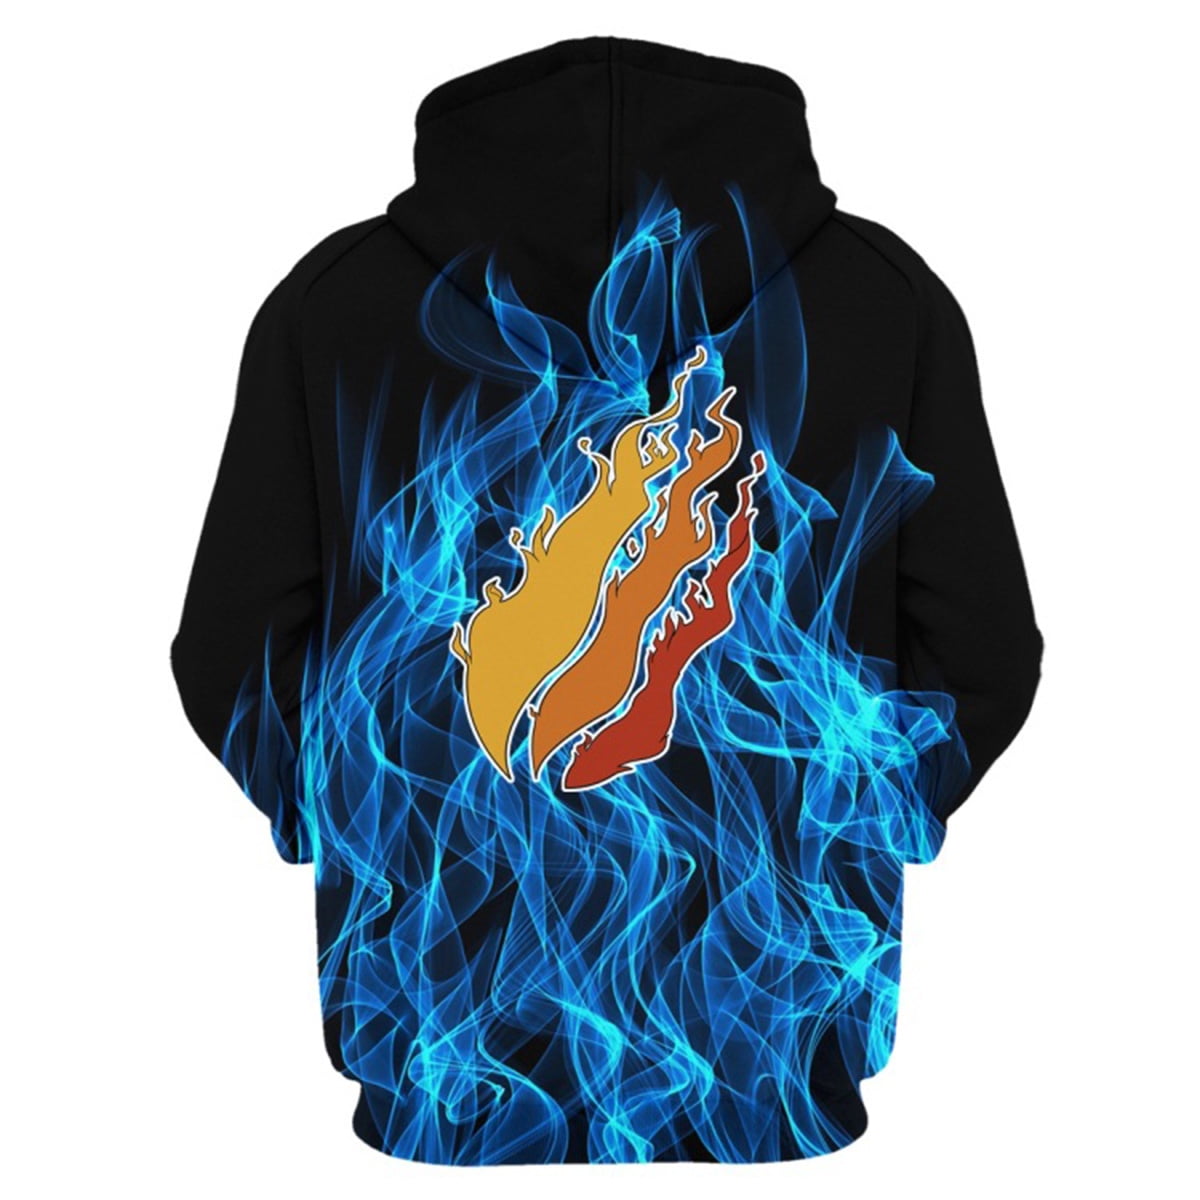 diqiuzhiyan Preston-Playz Hoodies for Youth Boys Girls 3D Graphic Hooded Sweatshirt Fire Flame Fashion Pullover with Pocket 